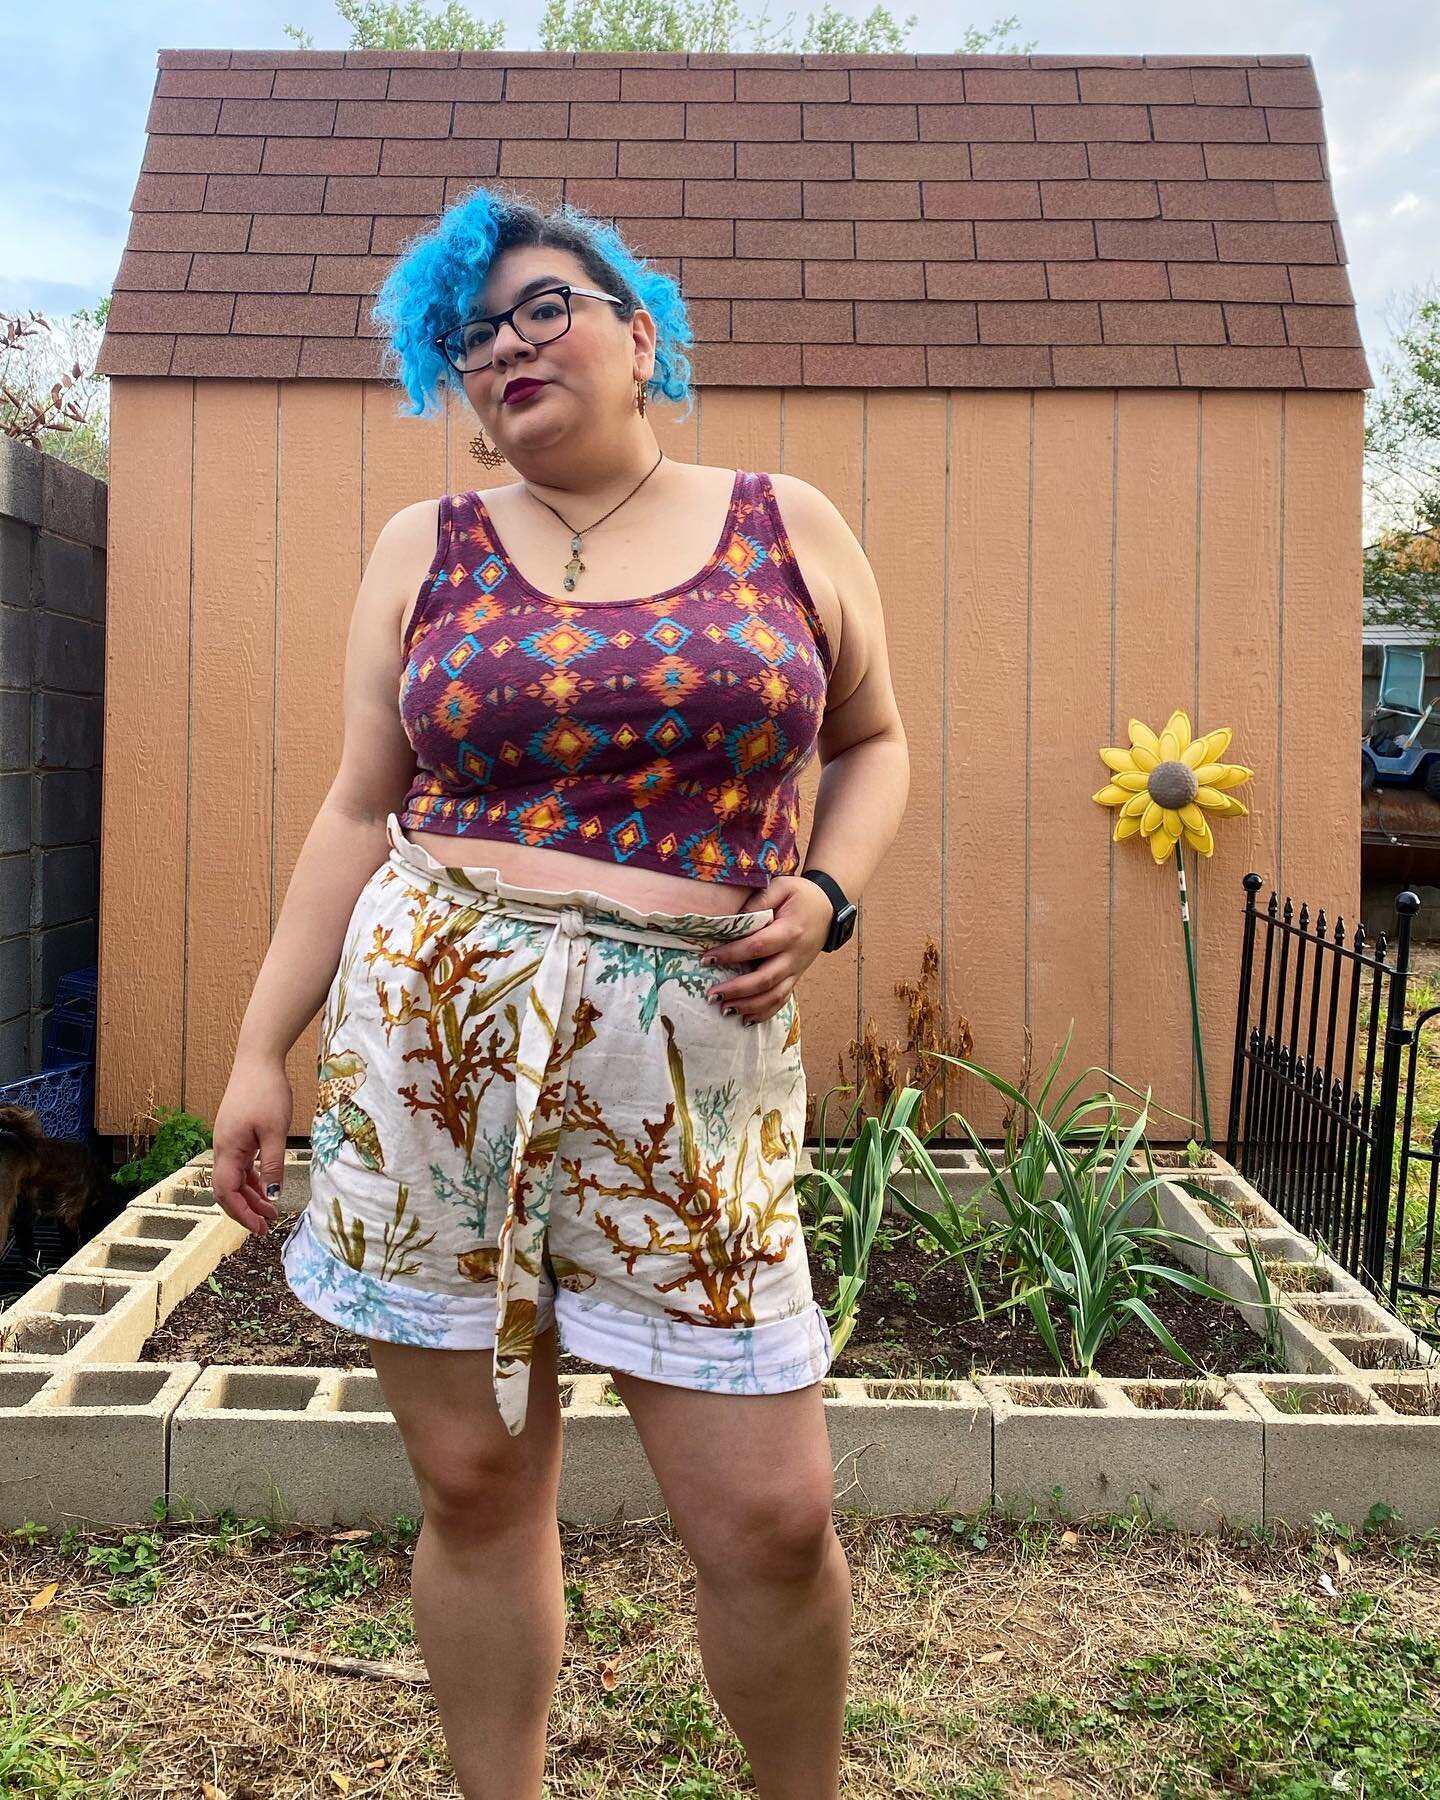 Back at it again with a new garment I&rsquo;ve made. This time around tried my hands at making some shorts! They came out pretty okay but maaaaan, they were a hassle because of the sizing.

Does anyone have a problem matching your measurements to the